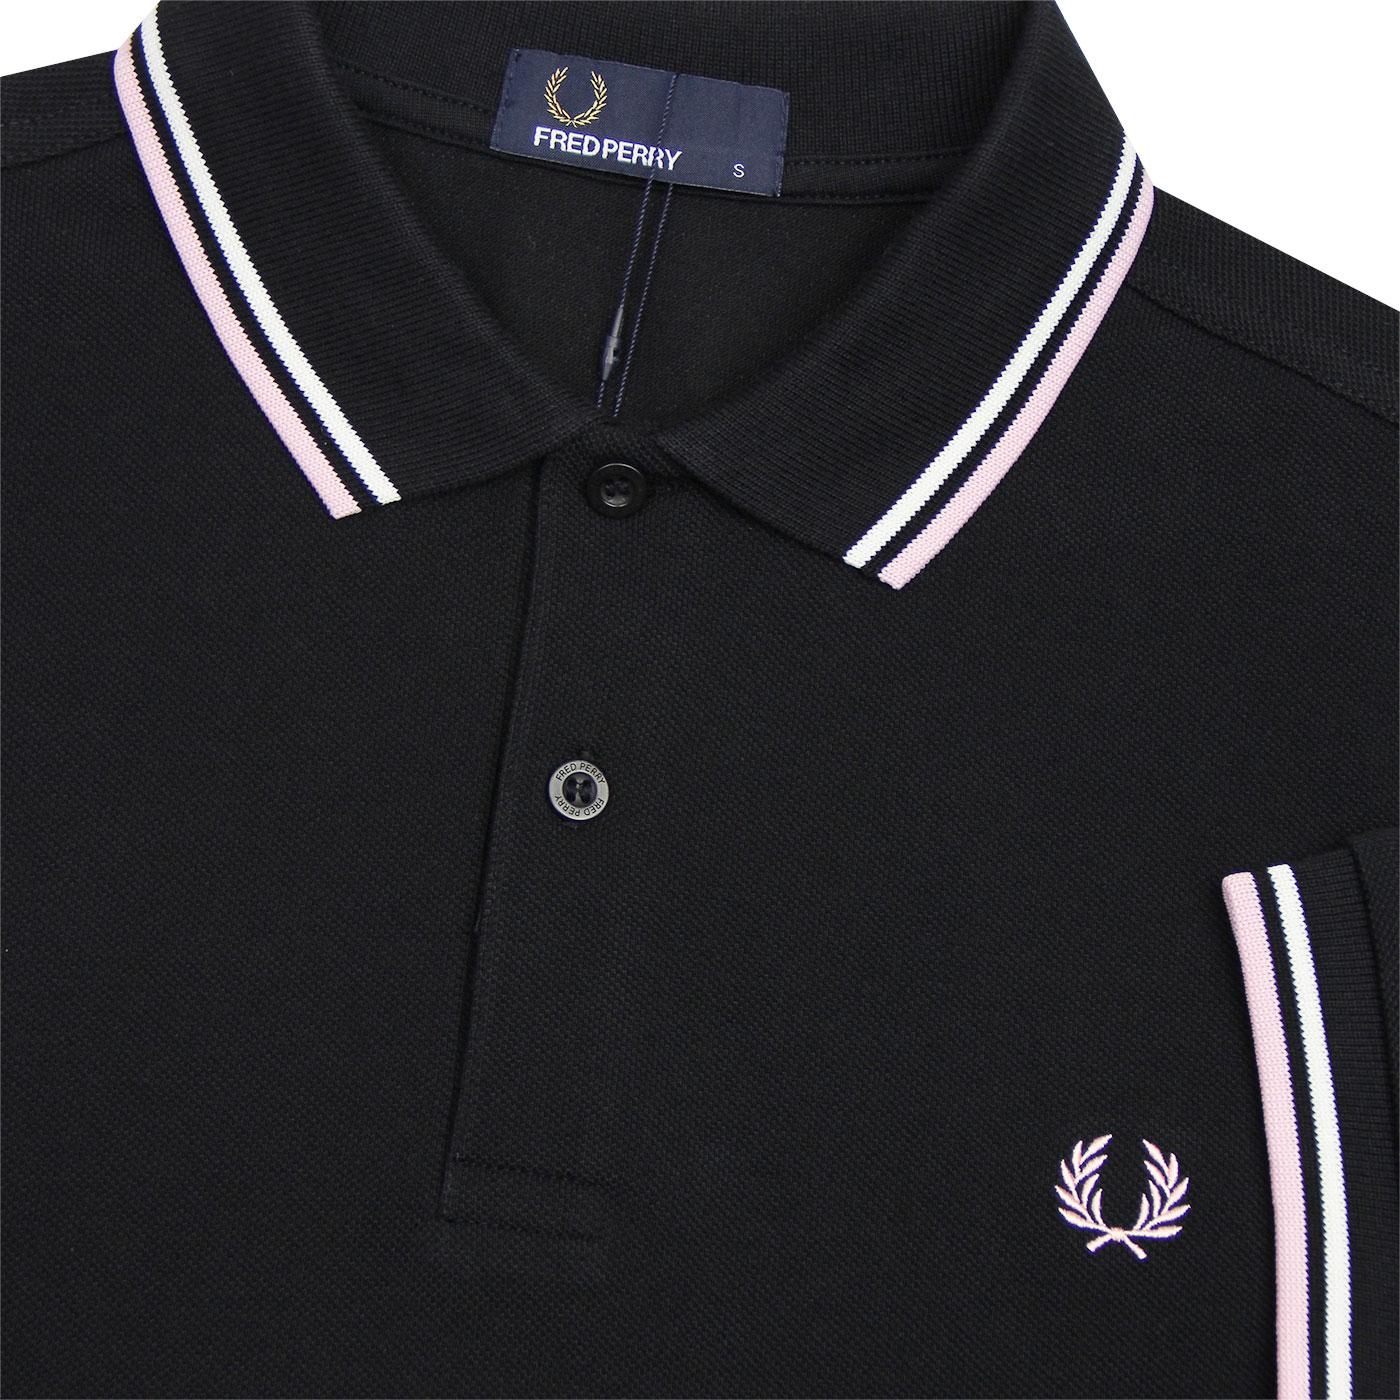 fred perry black twin tipped polo